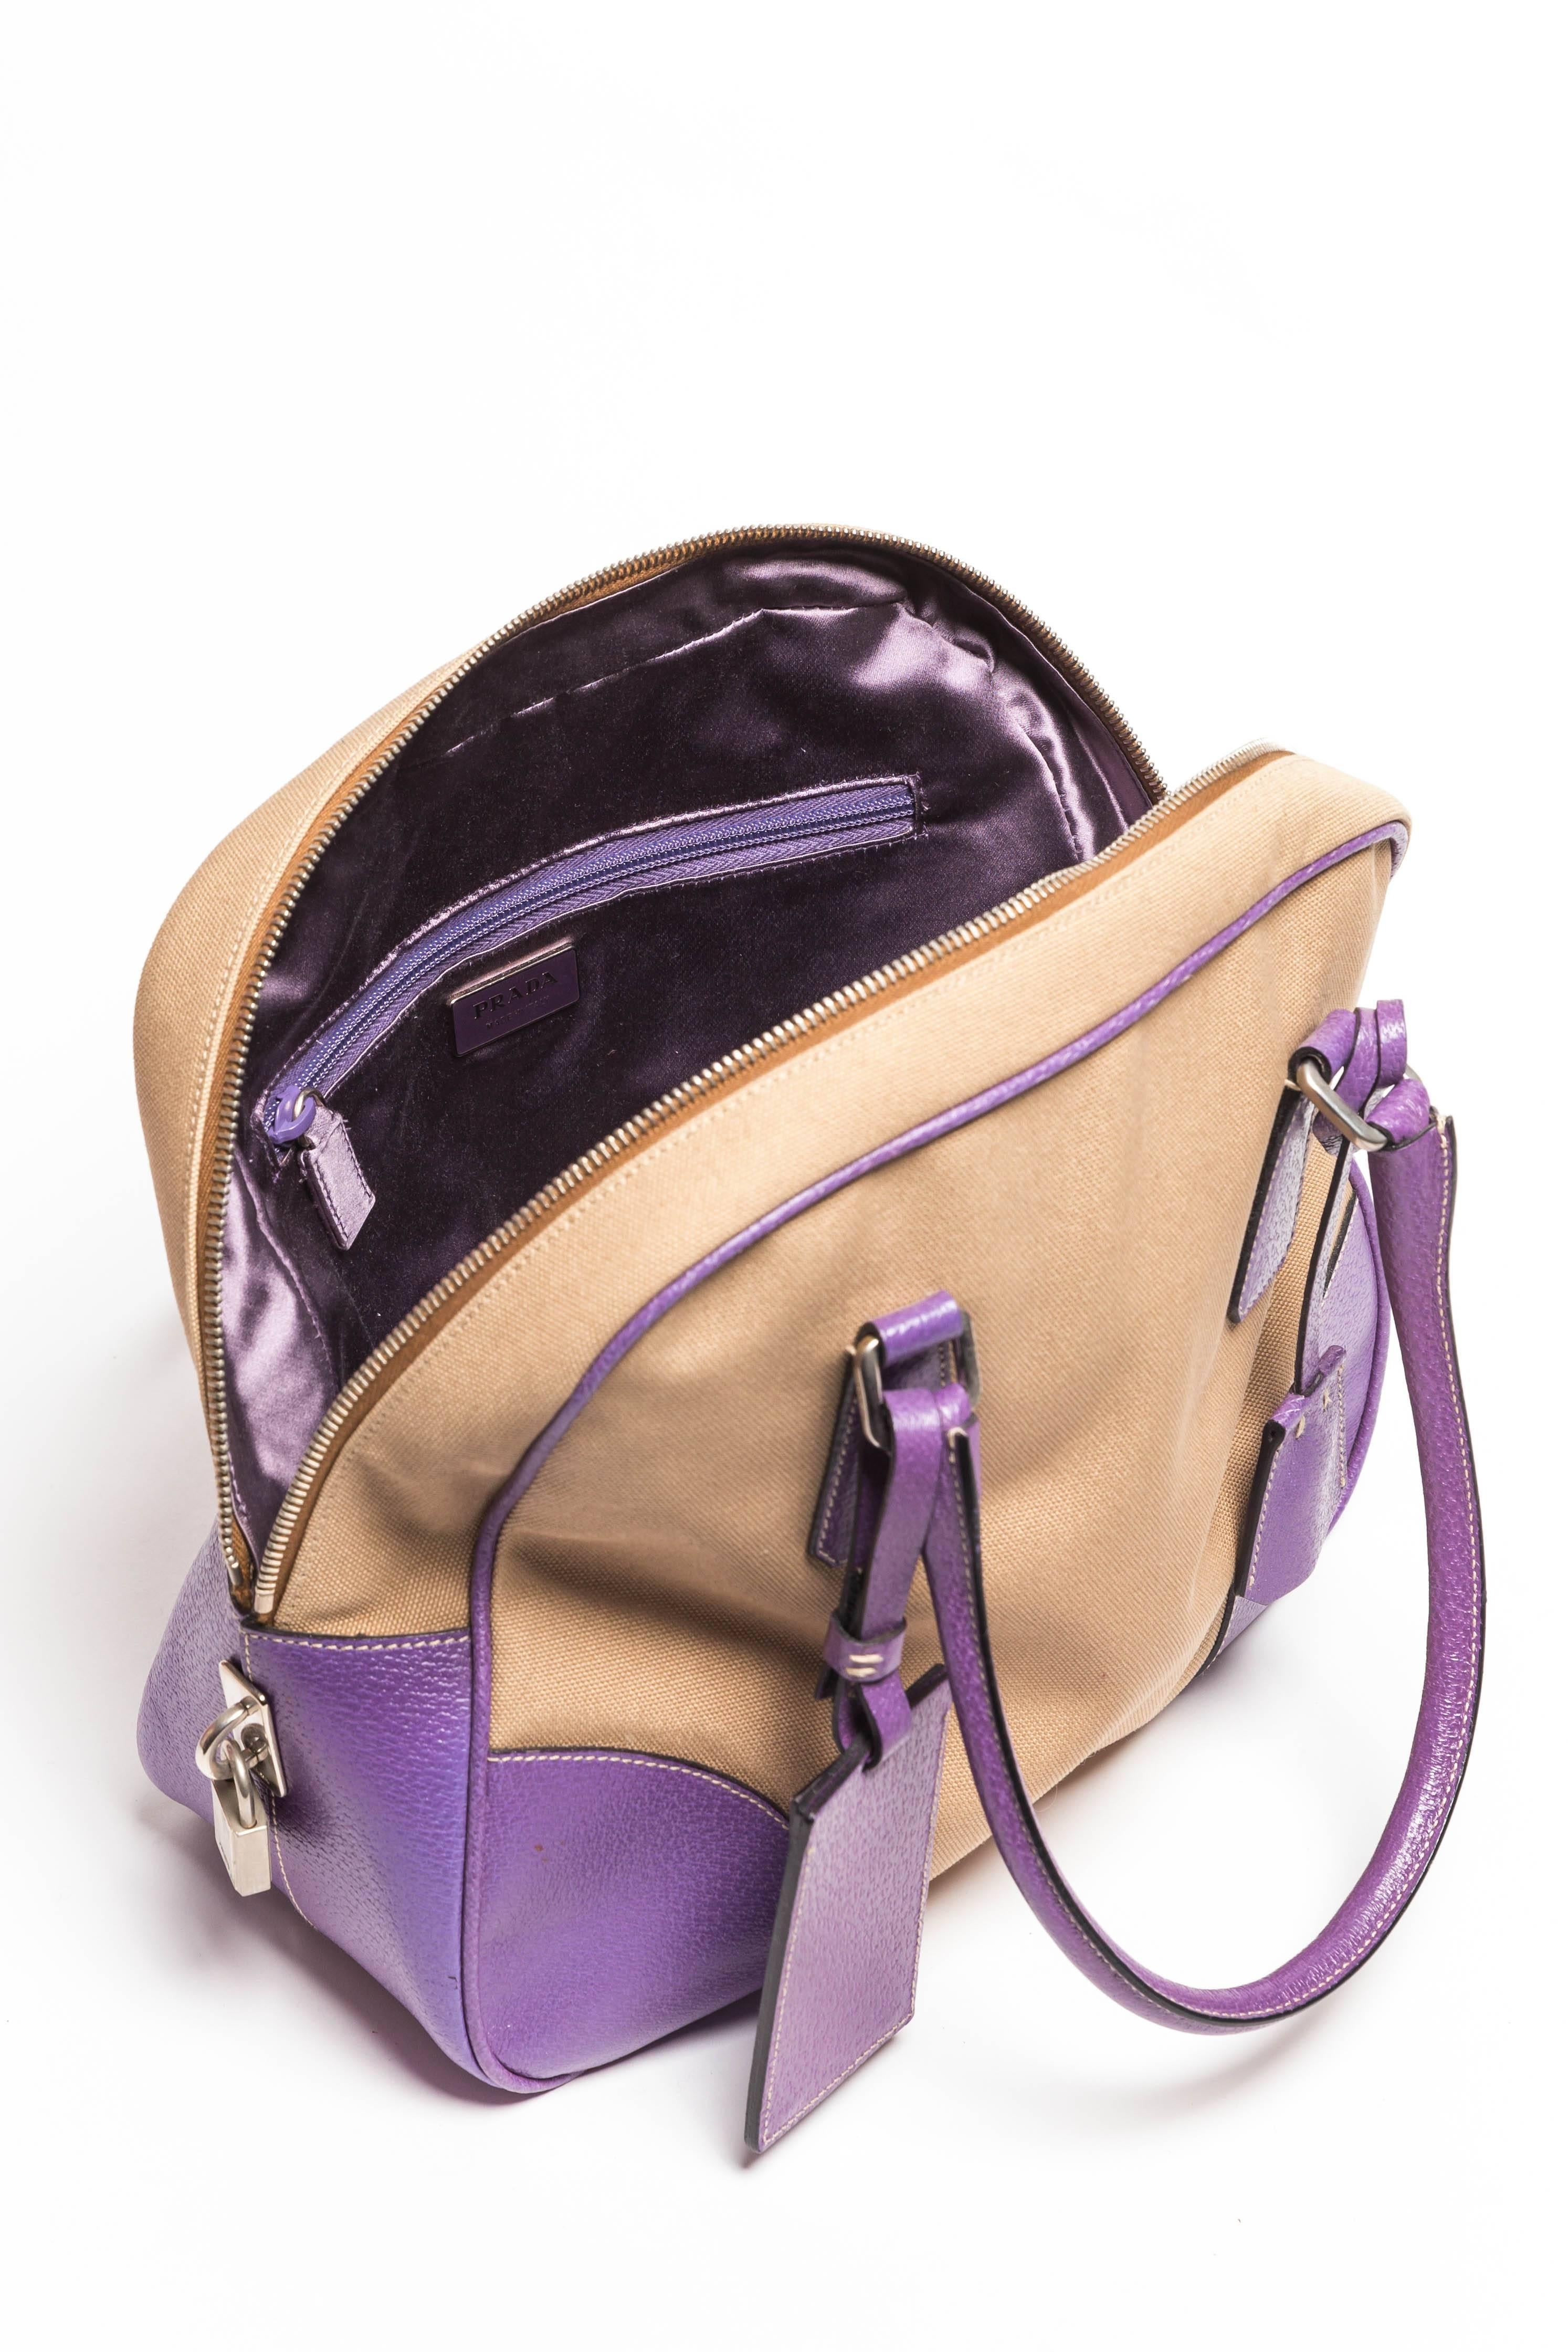 Prada Canvas and Purple Leather Top Handle Bag with Lock,  Keys and Luggage Tag For Sale 5